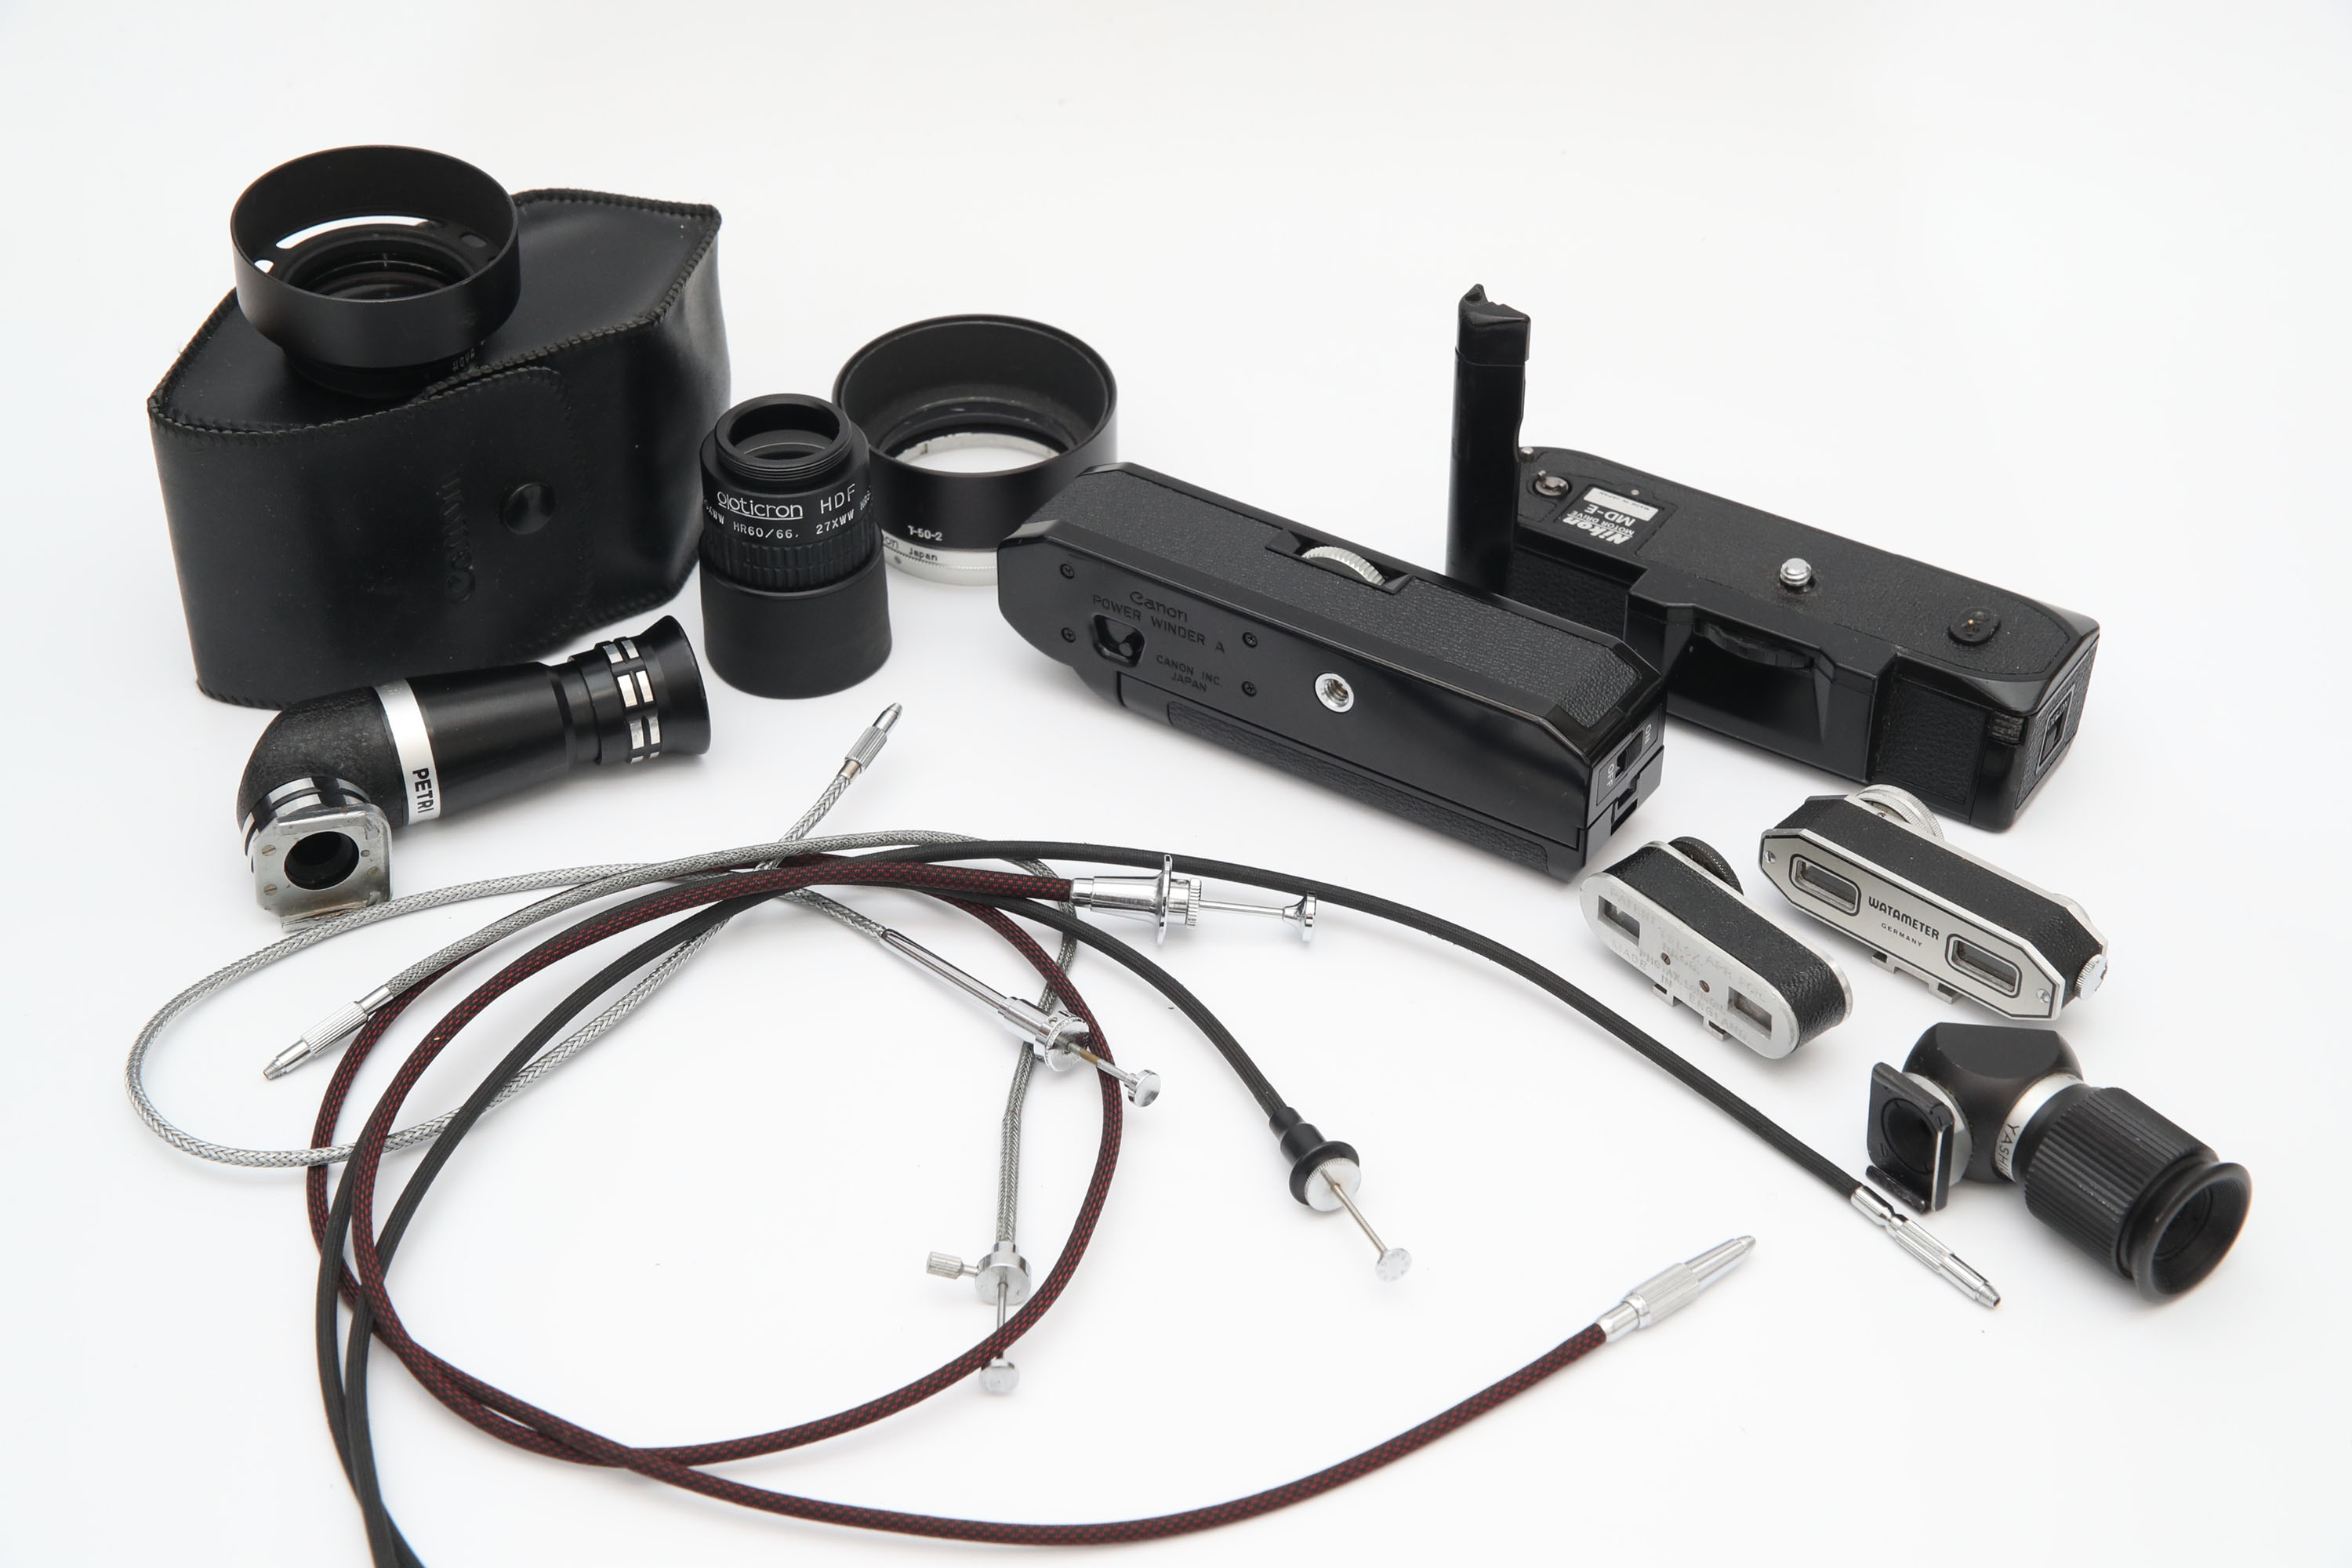 A Good Selection of Camera Accessories,